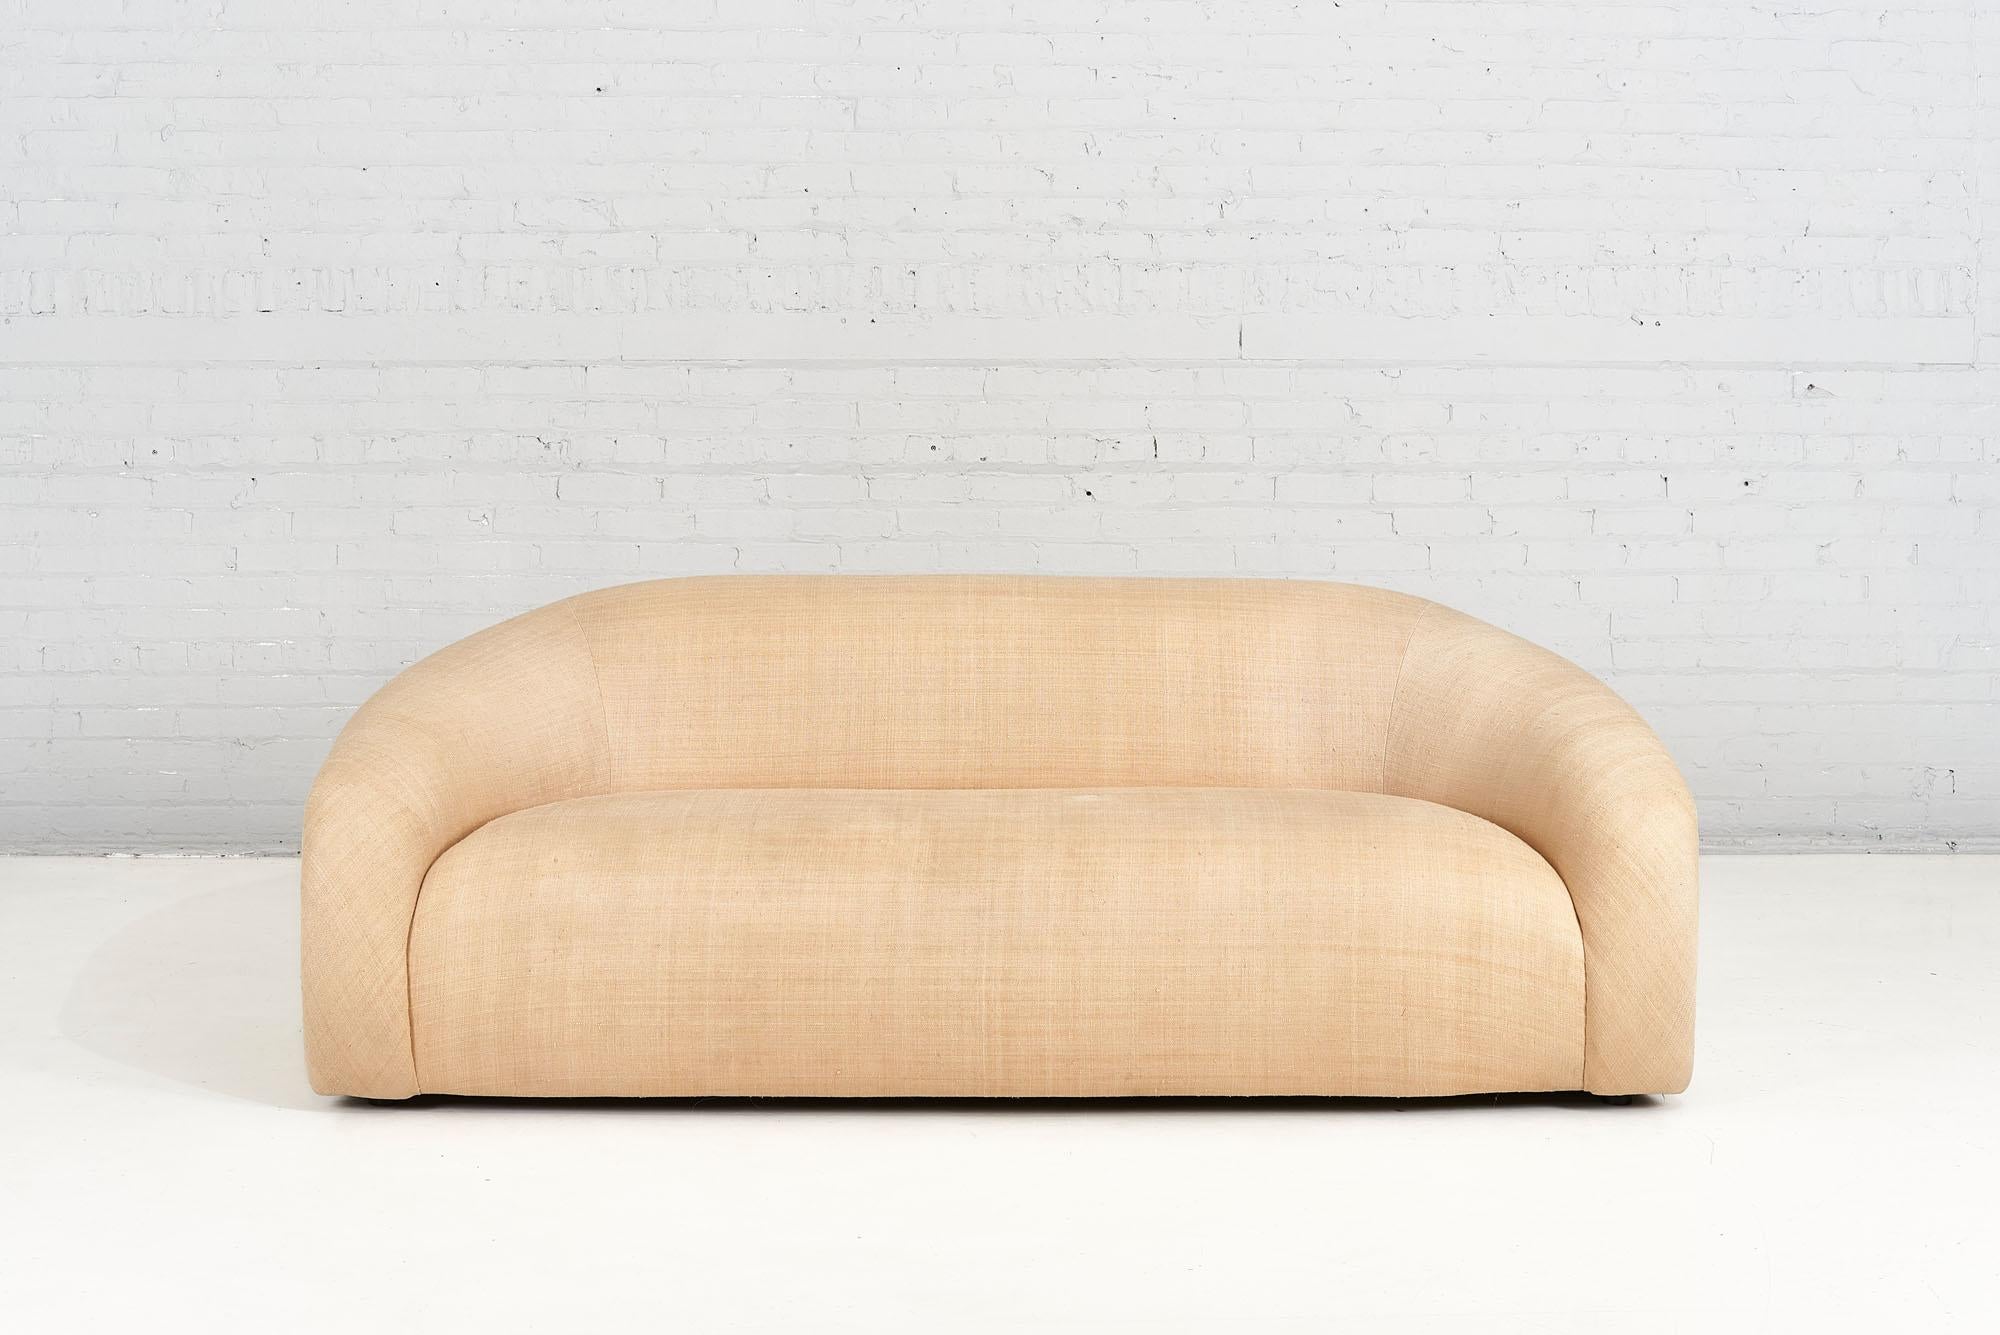 Organic Form sofa by Preview, ca 1991. Beautiful soft edge sofa in original linen upholstery.